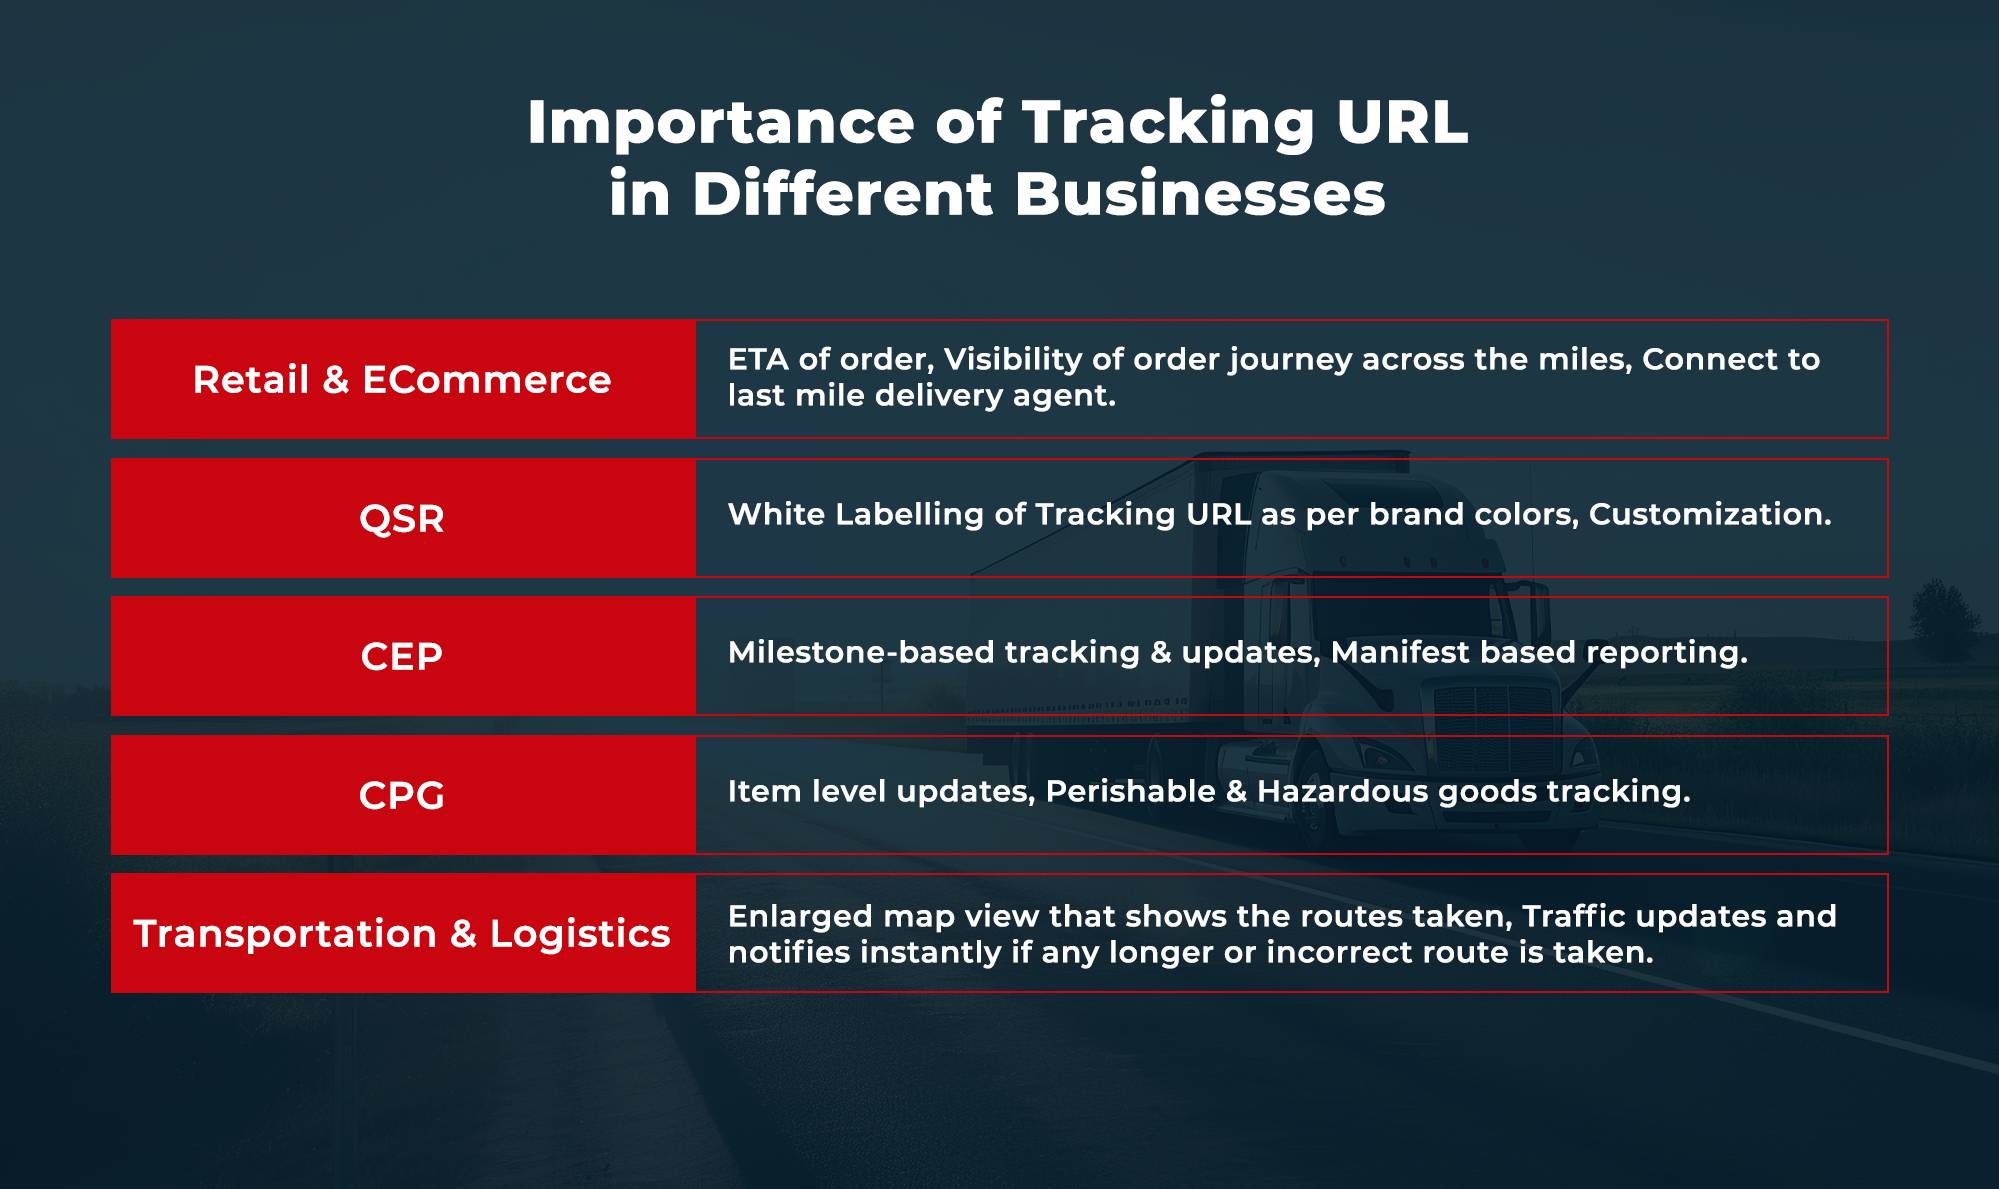 How Different Business Sectors Benefit From Tracking URLs